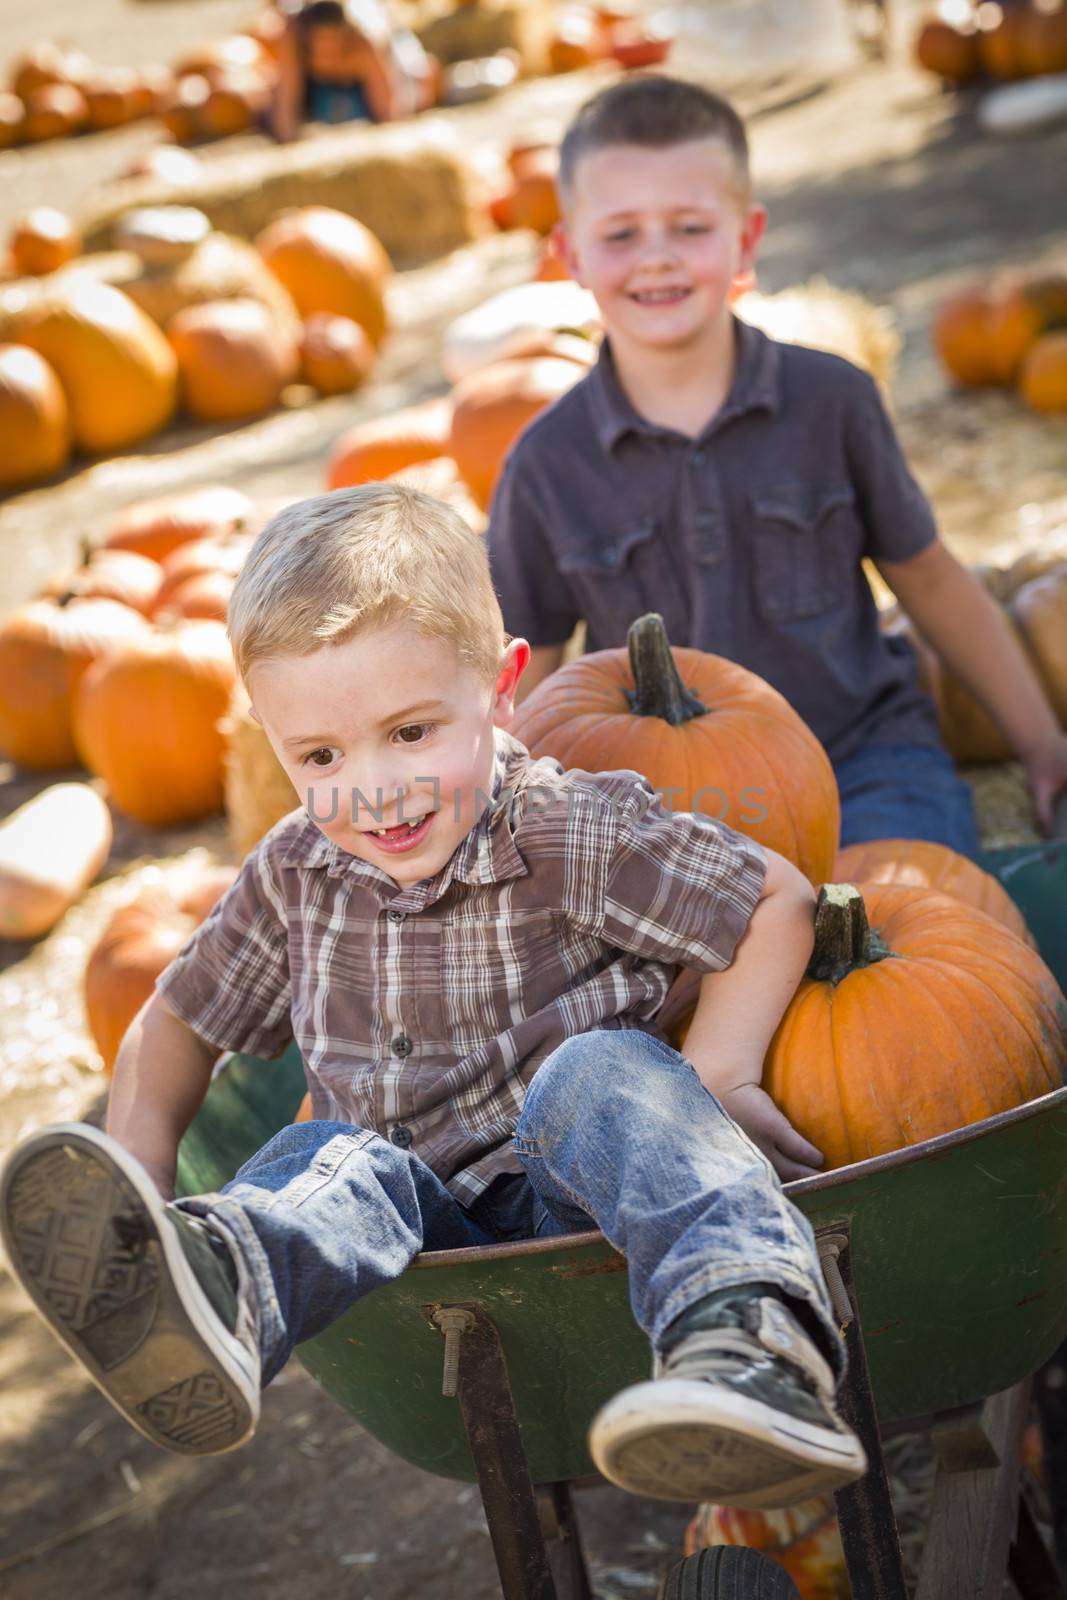 Two Little Boys Playing in Wheelbarrow at the Pumpkin Patch in a Rustic Country Setting.